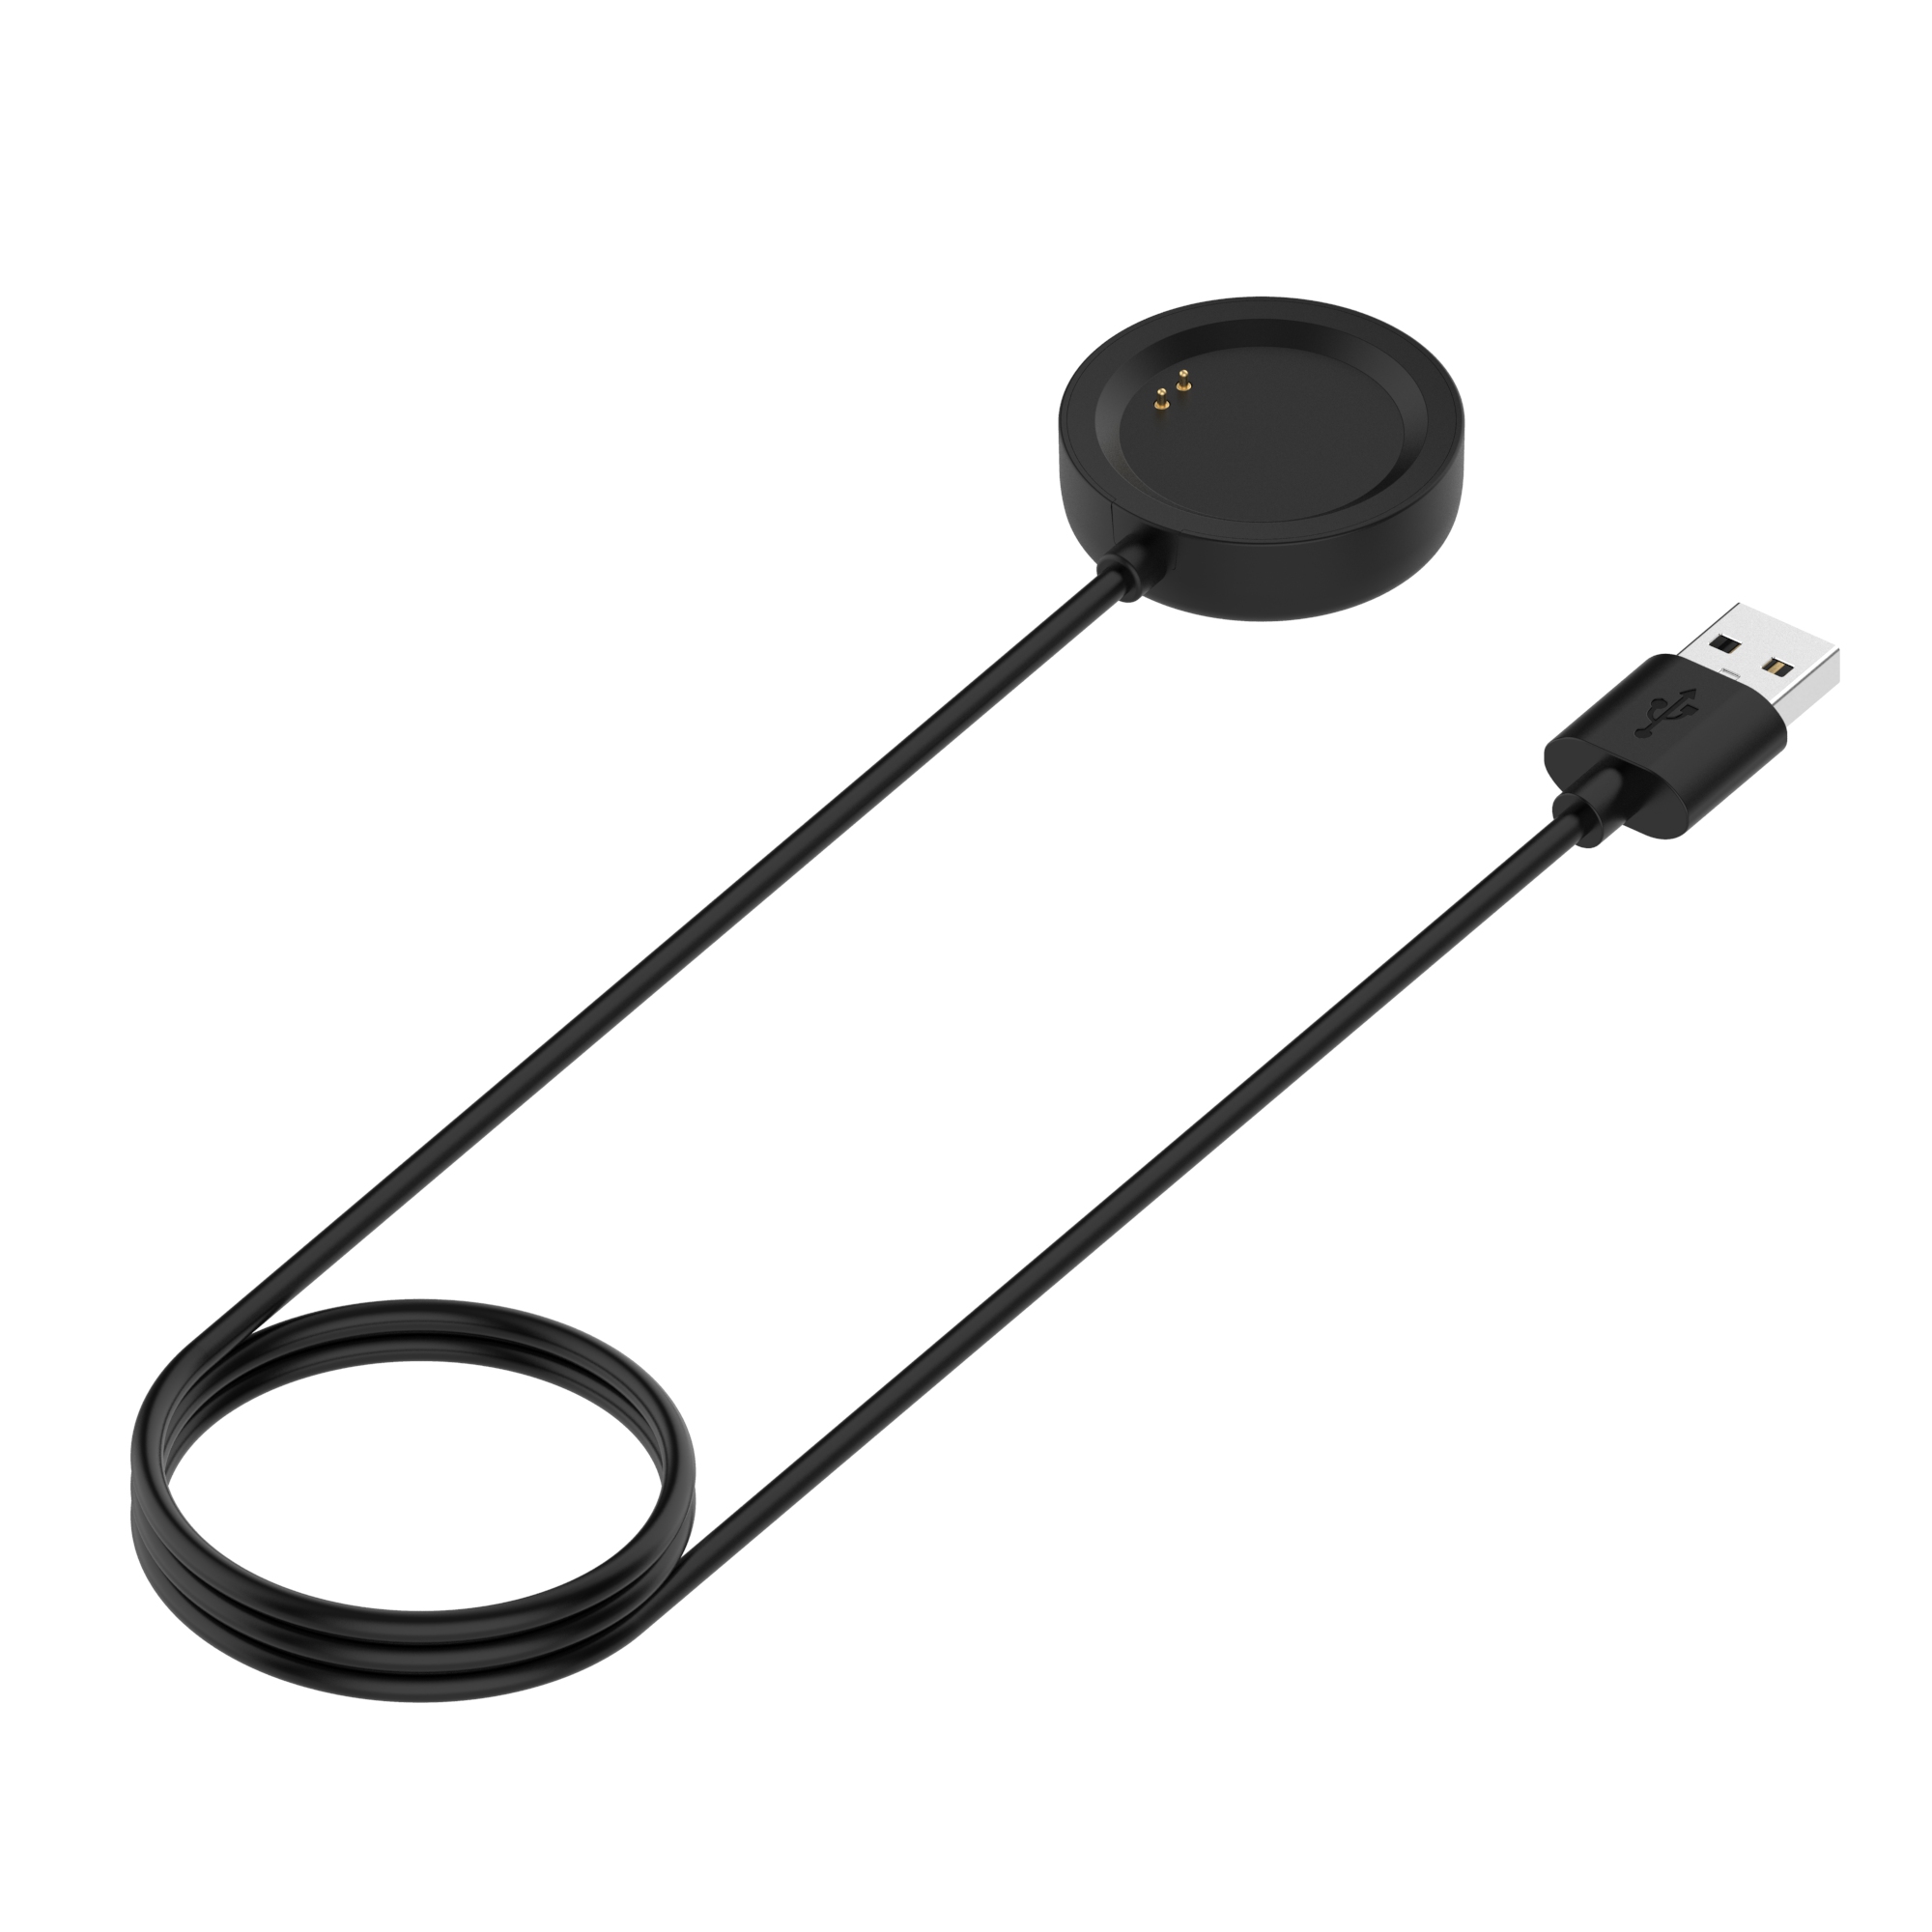 Bakeey 1m Watch Cable Charging Cable for Oneplus Watch